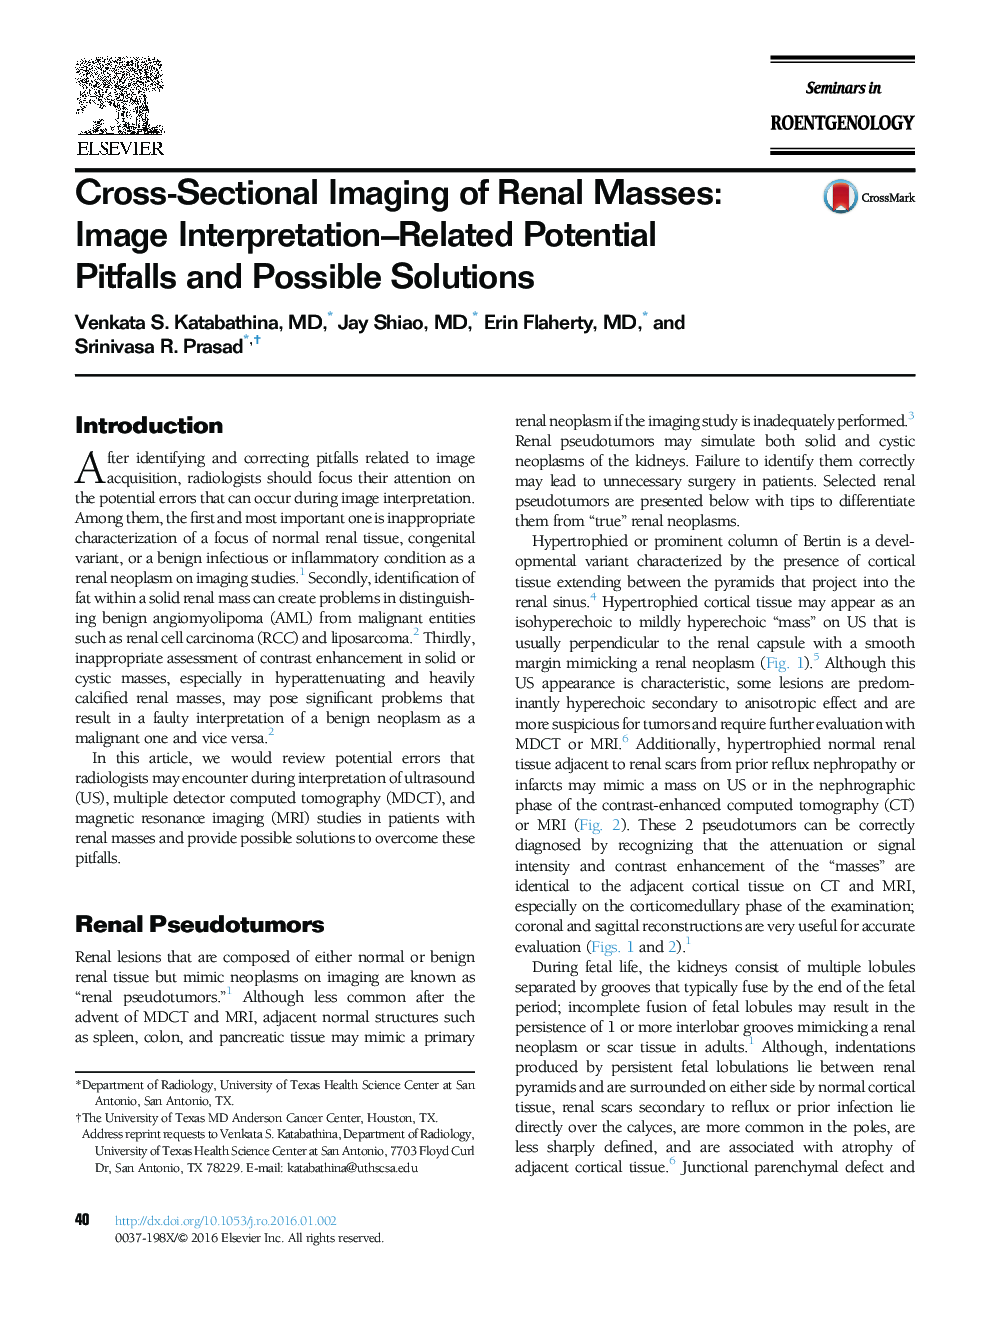 Cross-Sectional Imaging of Renal Masses: Image Interpretation-Related Potential Pitfalls and Possible Solutions